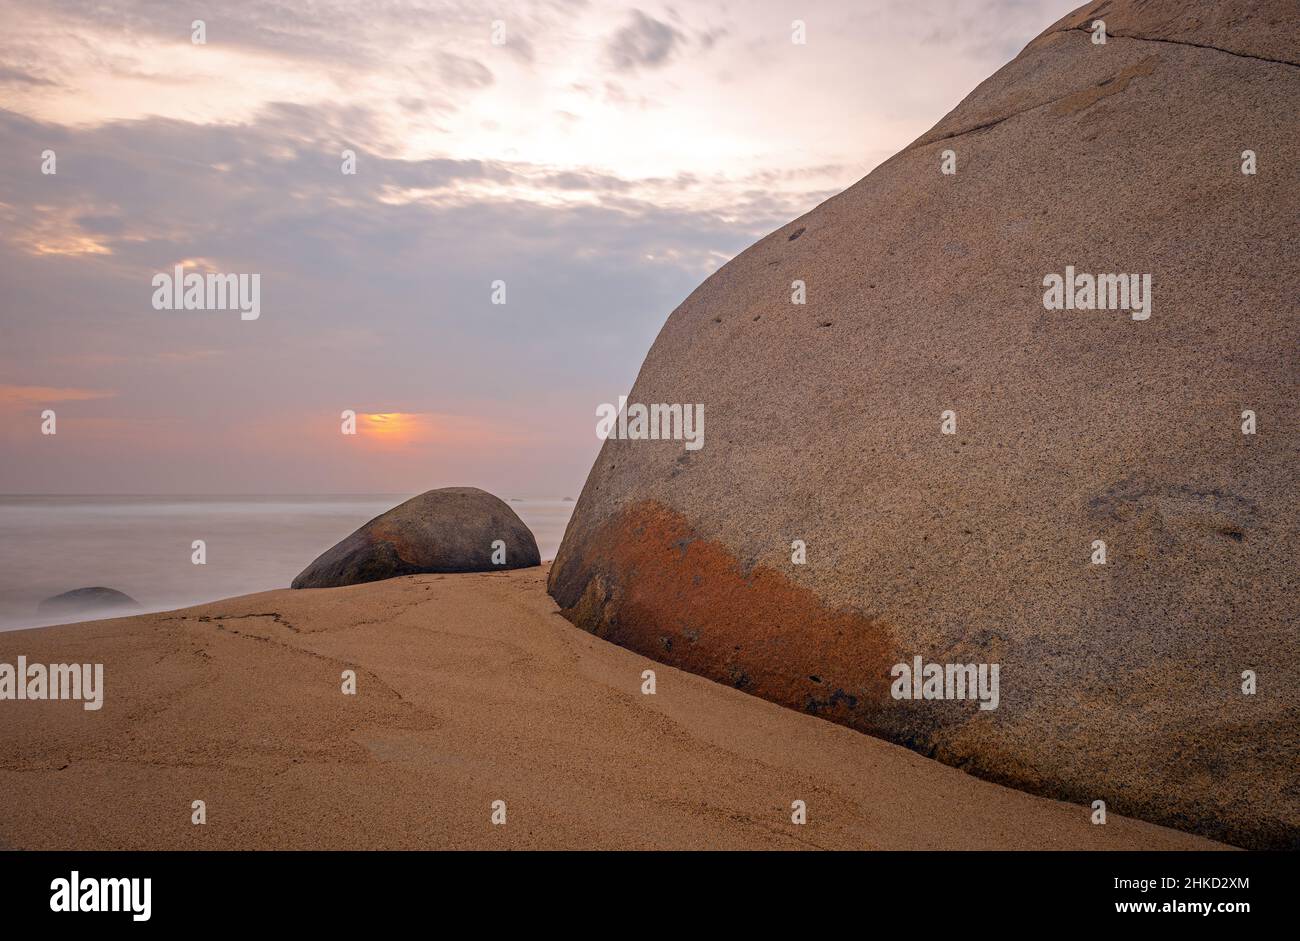 Long exposure sunrise by the big rock boulder beach and Caribbean Sea of Tayrona national park, Colombia. Stock Photo